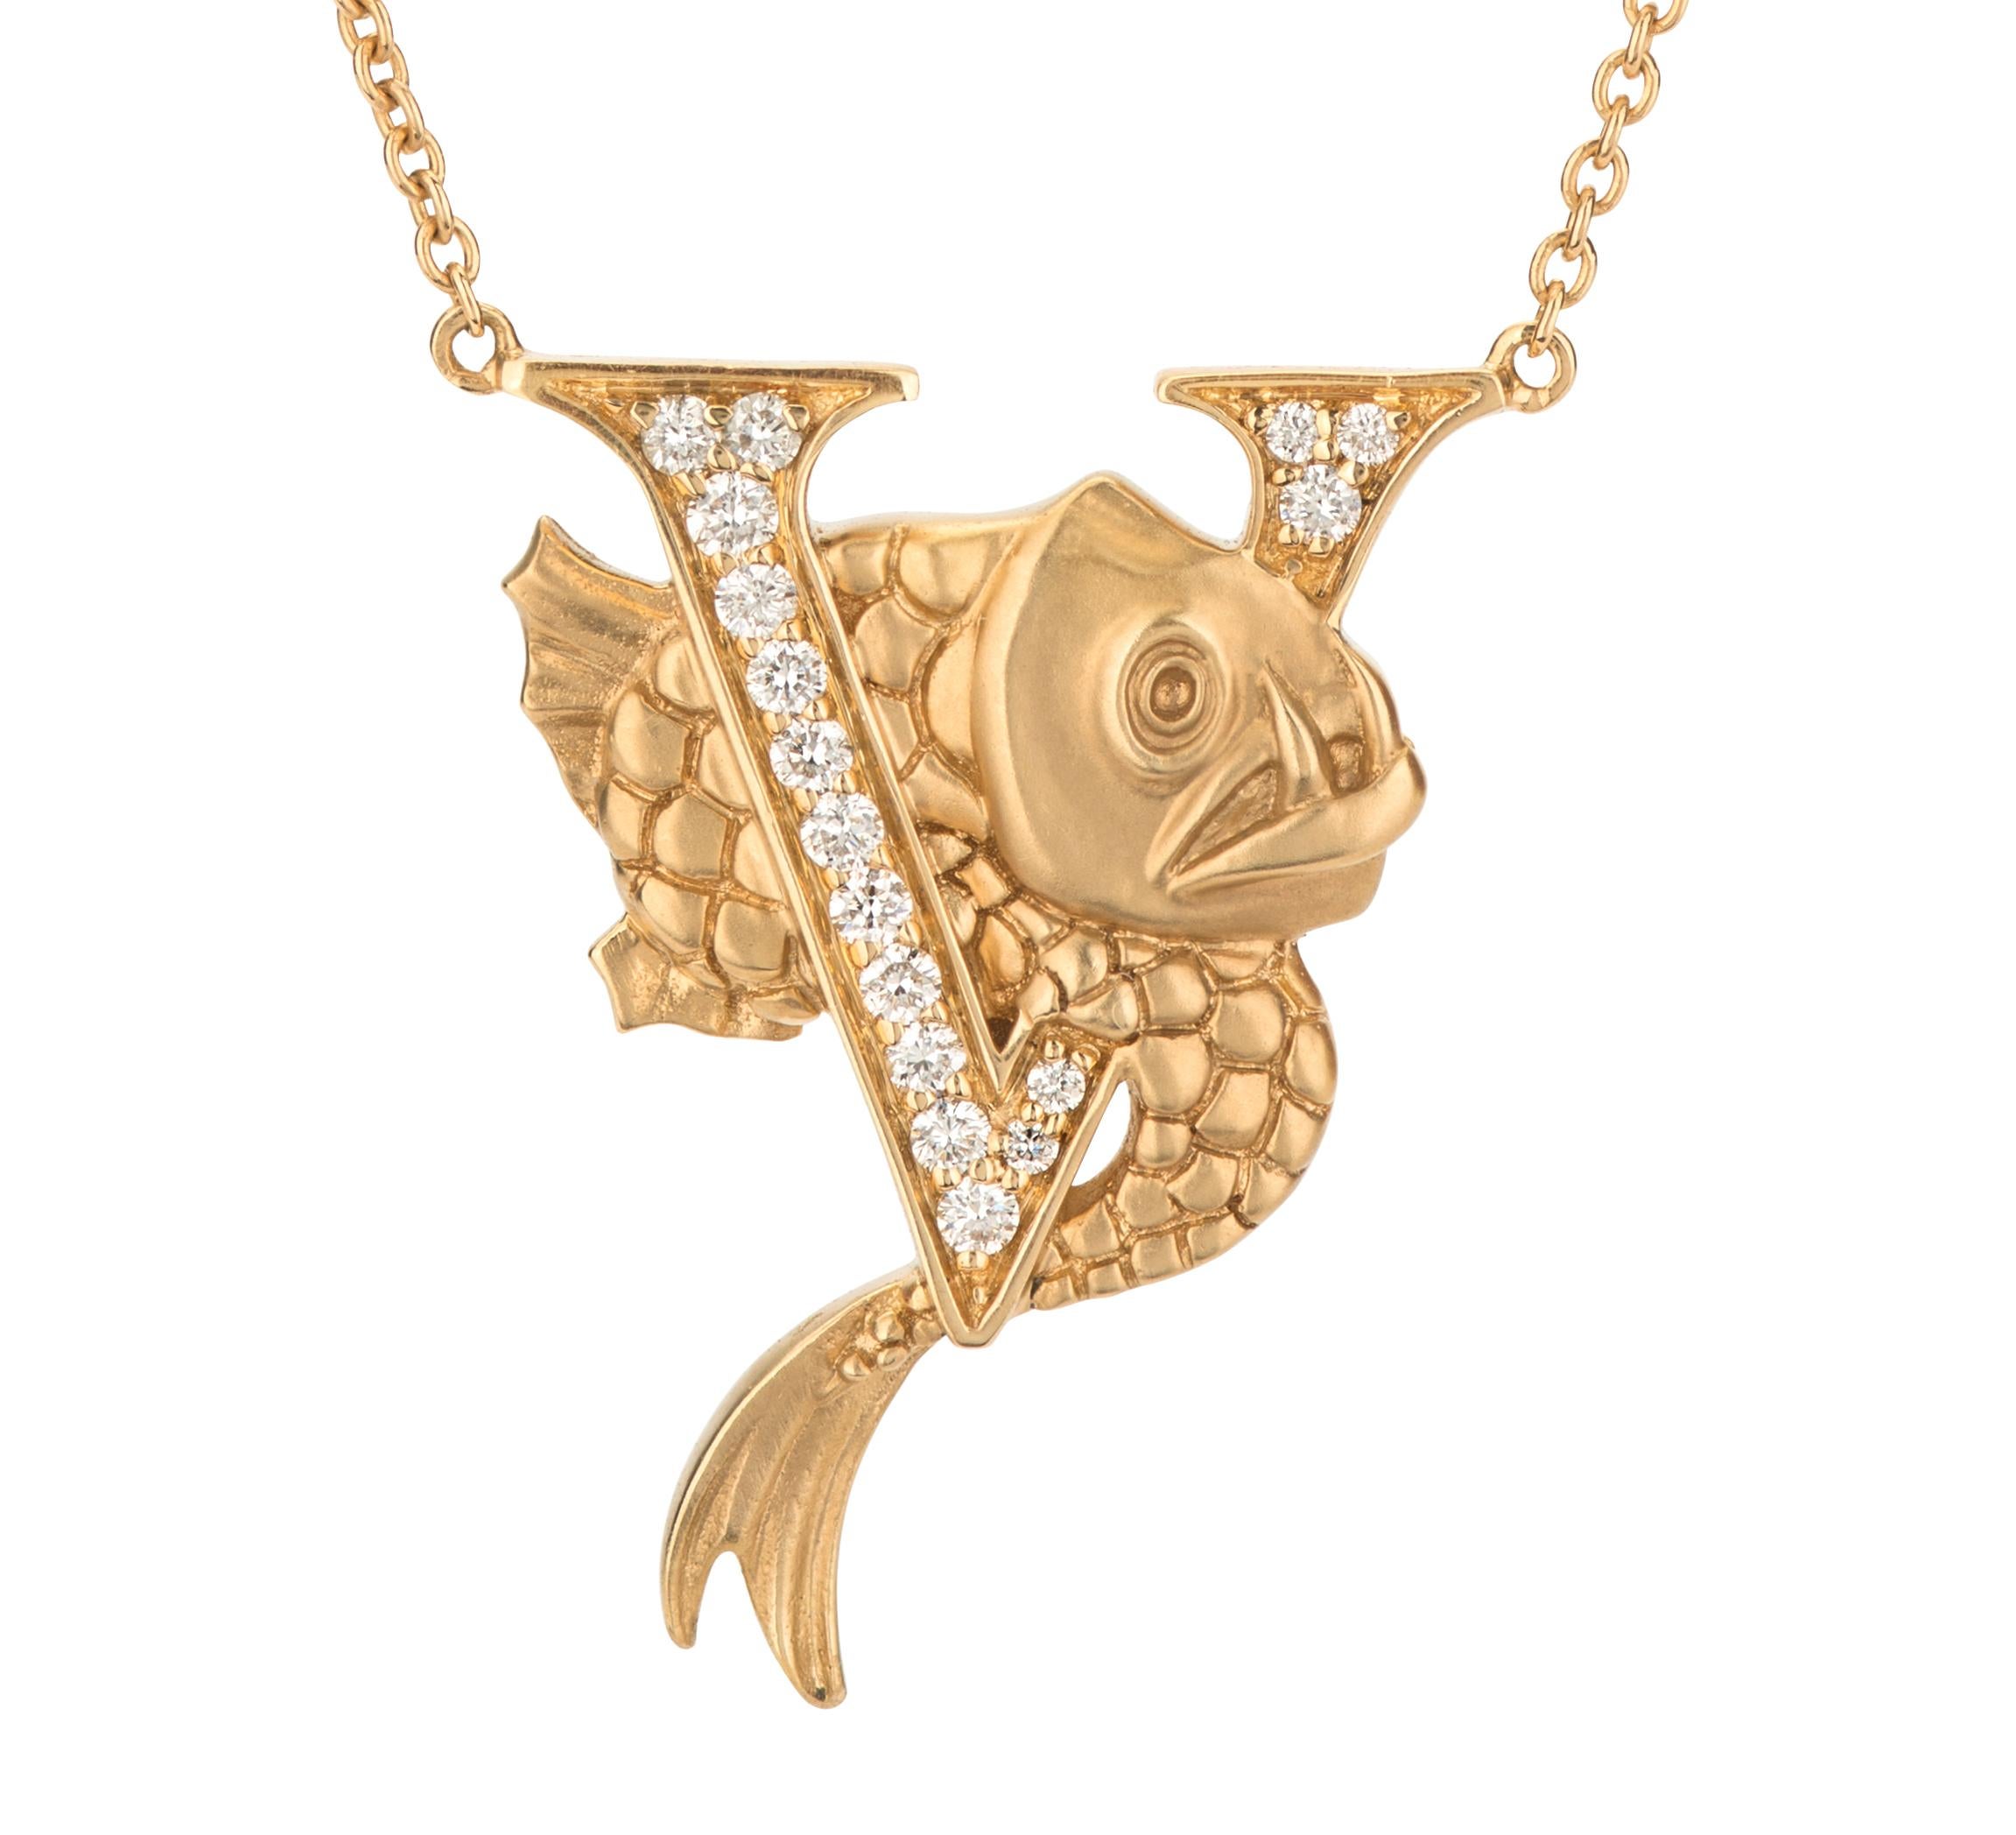 Embrace your initials and the fascinating sea world with our ‘V is for Viper Fish’ diamond necklace. Set on a 42cm gold chain this alphabet necklace features a matt finish viper fish entwined with a white diamond letter V.

Each necklace is